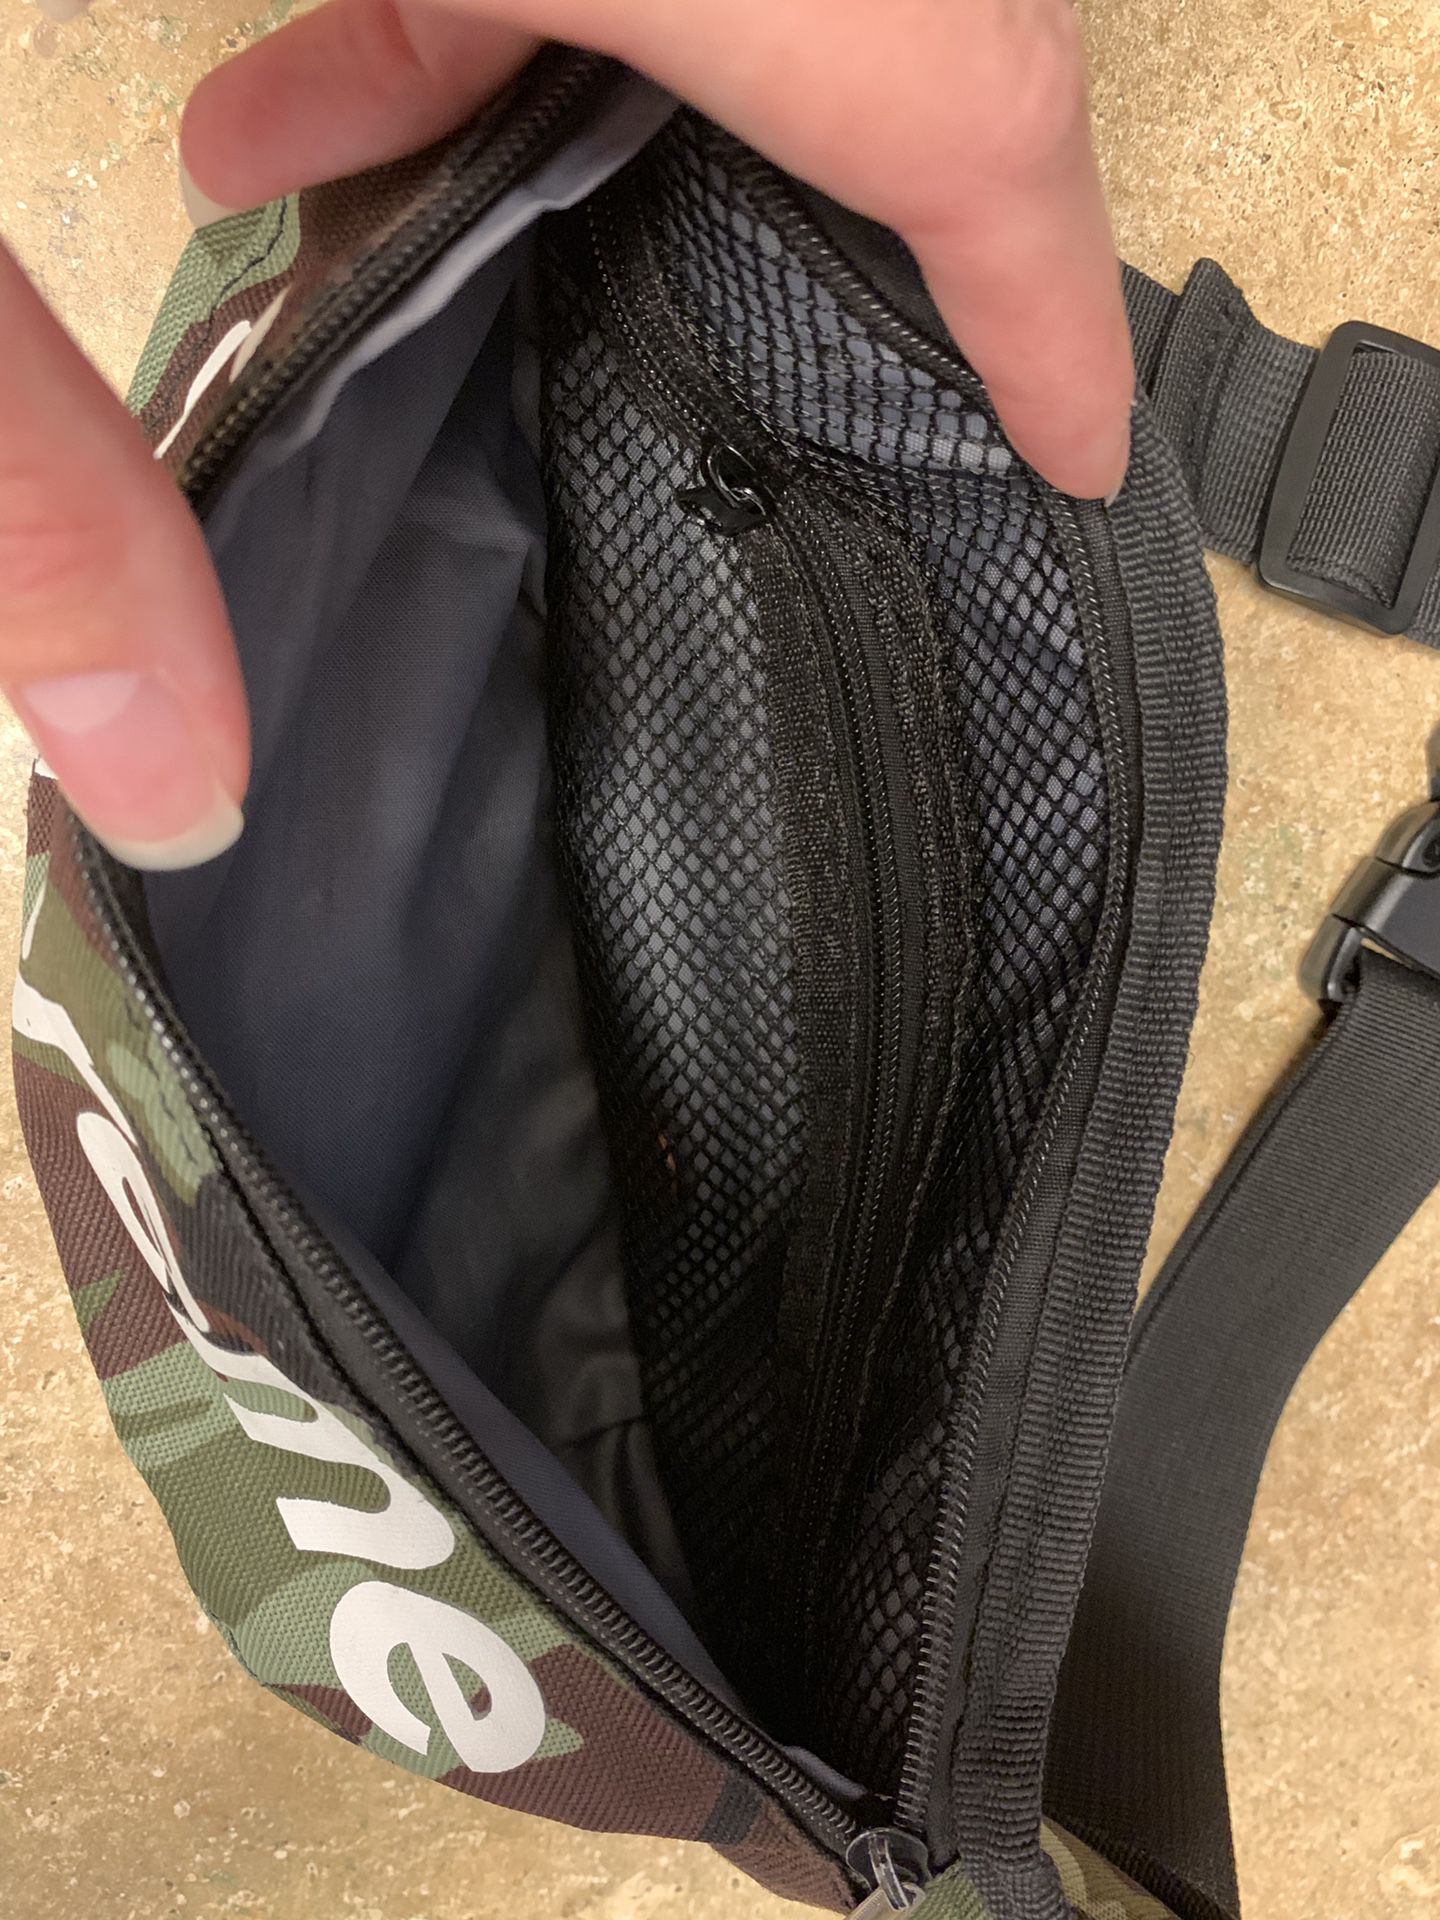 Supreme SS21 Camo Waist Bag Unsealed for Sale in Miami, FL - OfferUp